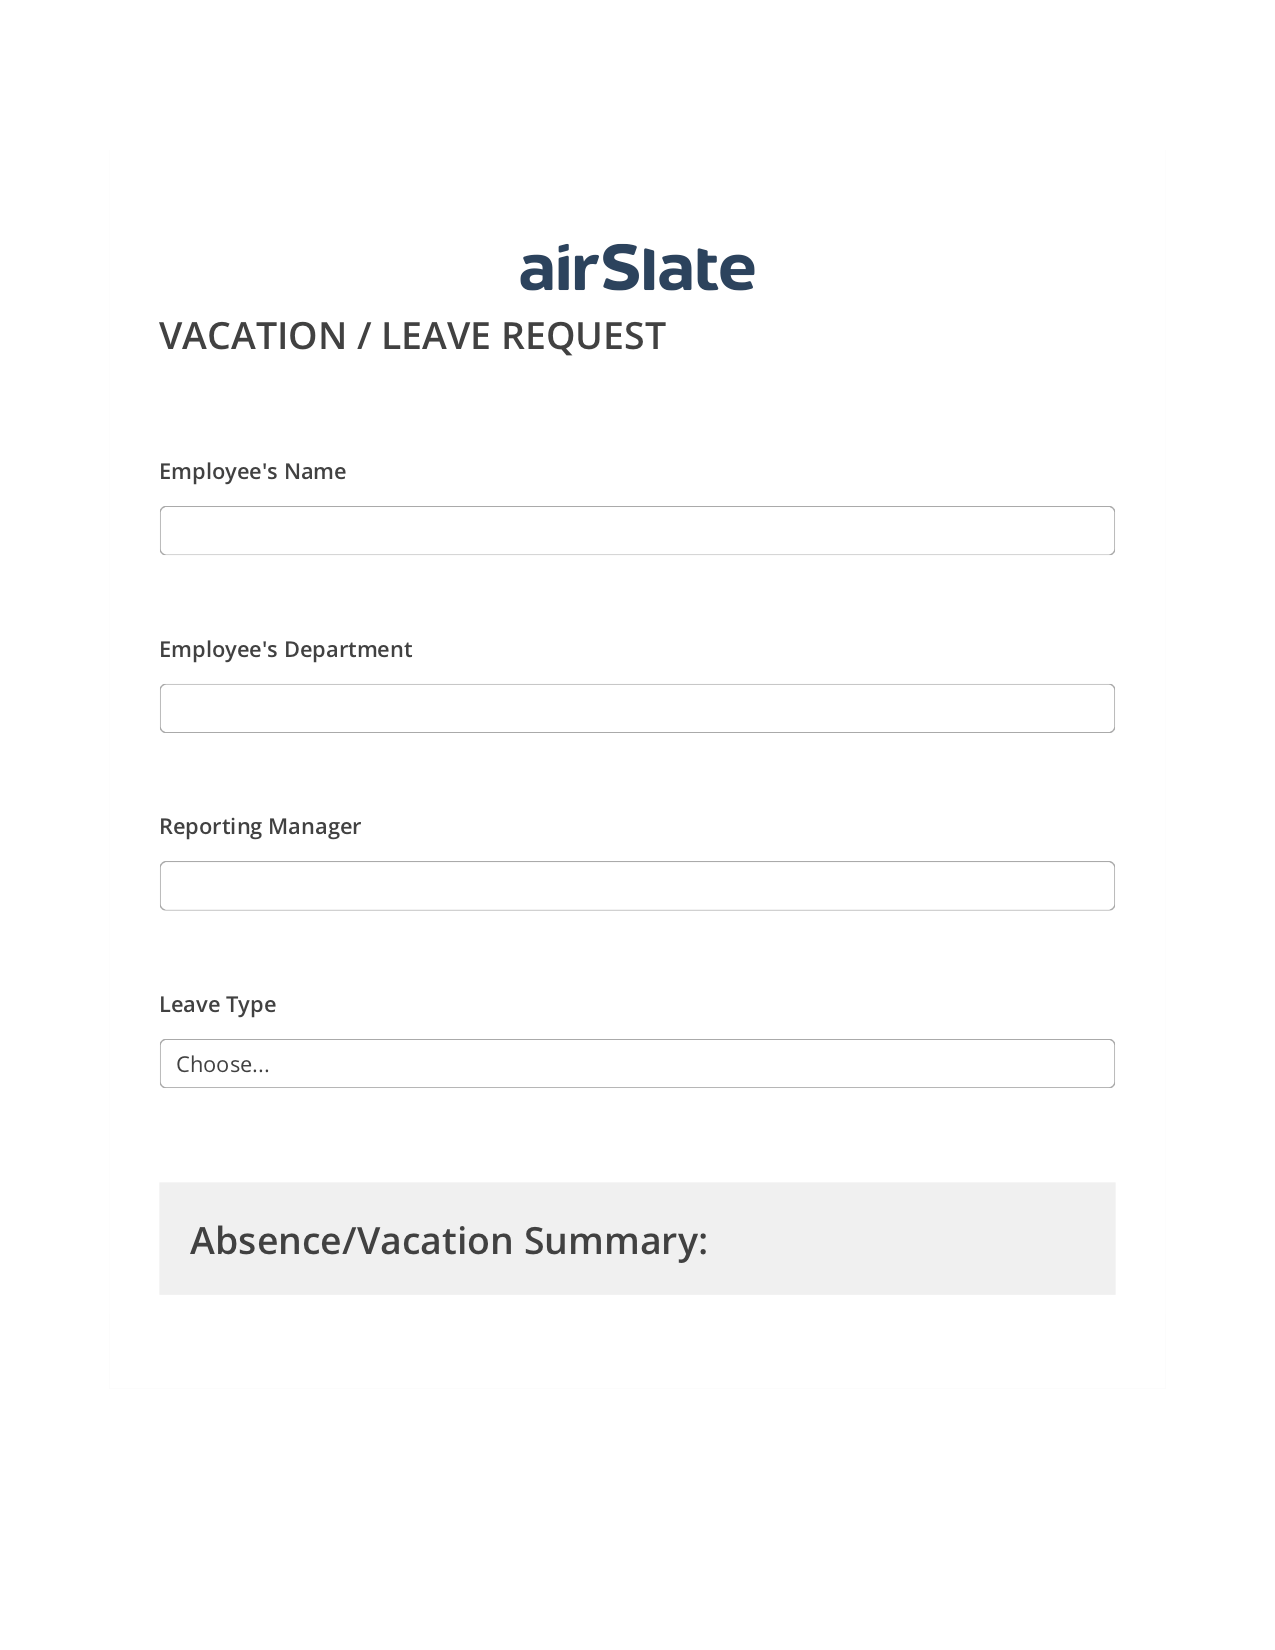 Vacation/Leave Request Workflow Pre-fill from CSV File Bot, SendGrid send Campaign bot, Text Message Notification Postfinish Bot